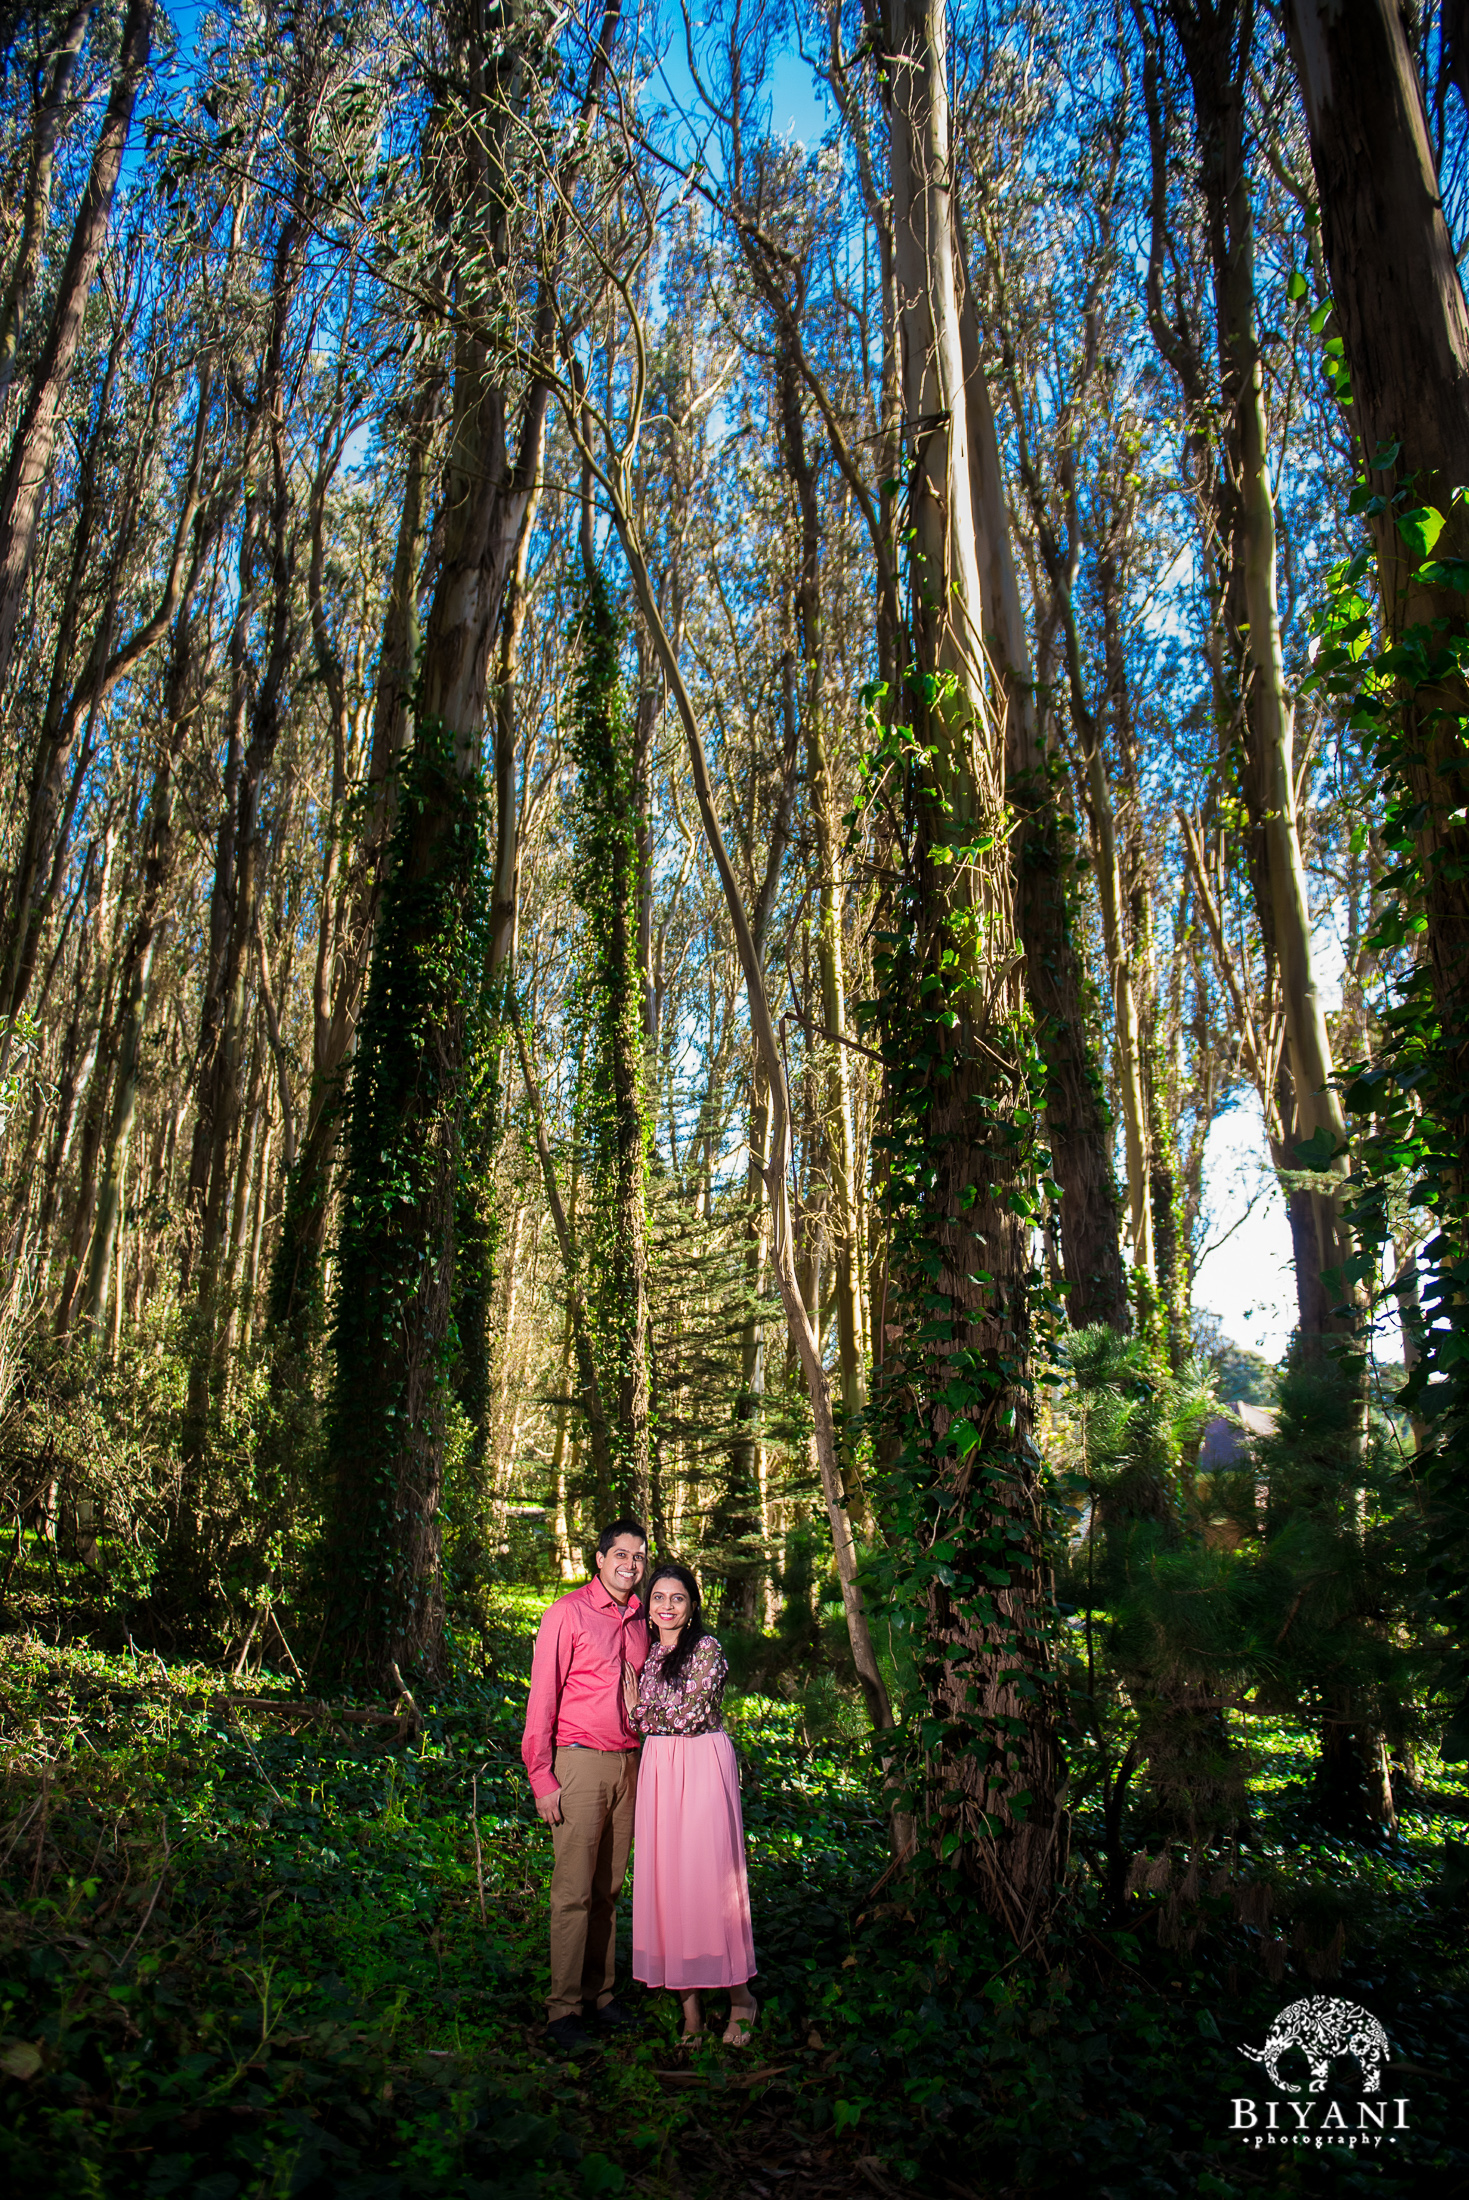 San Francisco Indian Engagement Photosin the forest during the day